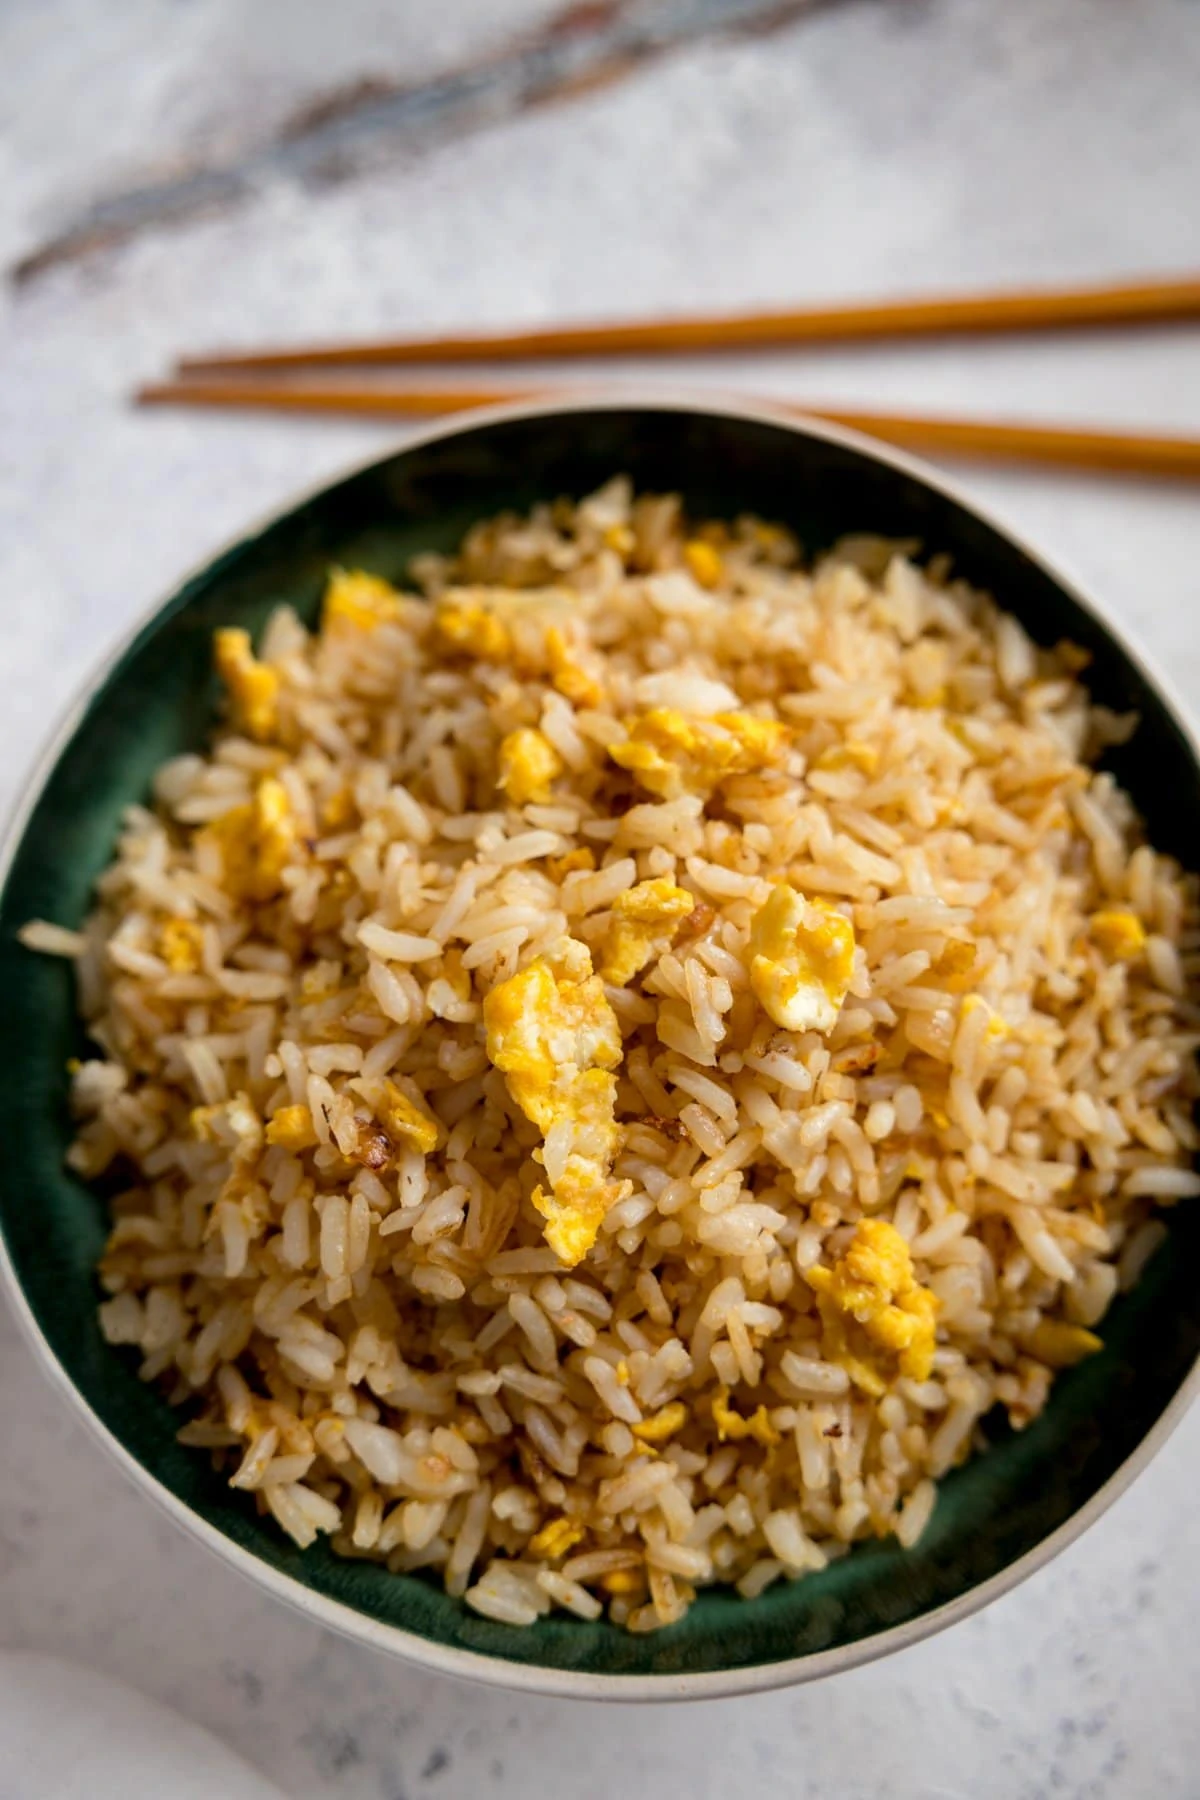 Elderly woman in china dies from food poisoning after eating overnight fried rice